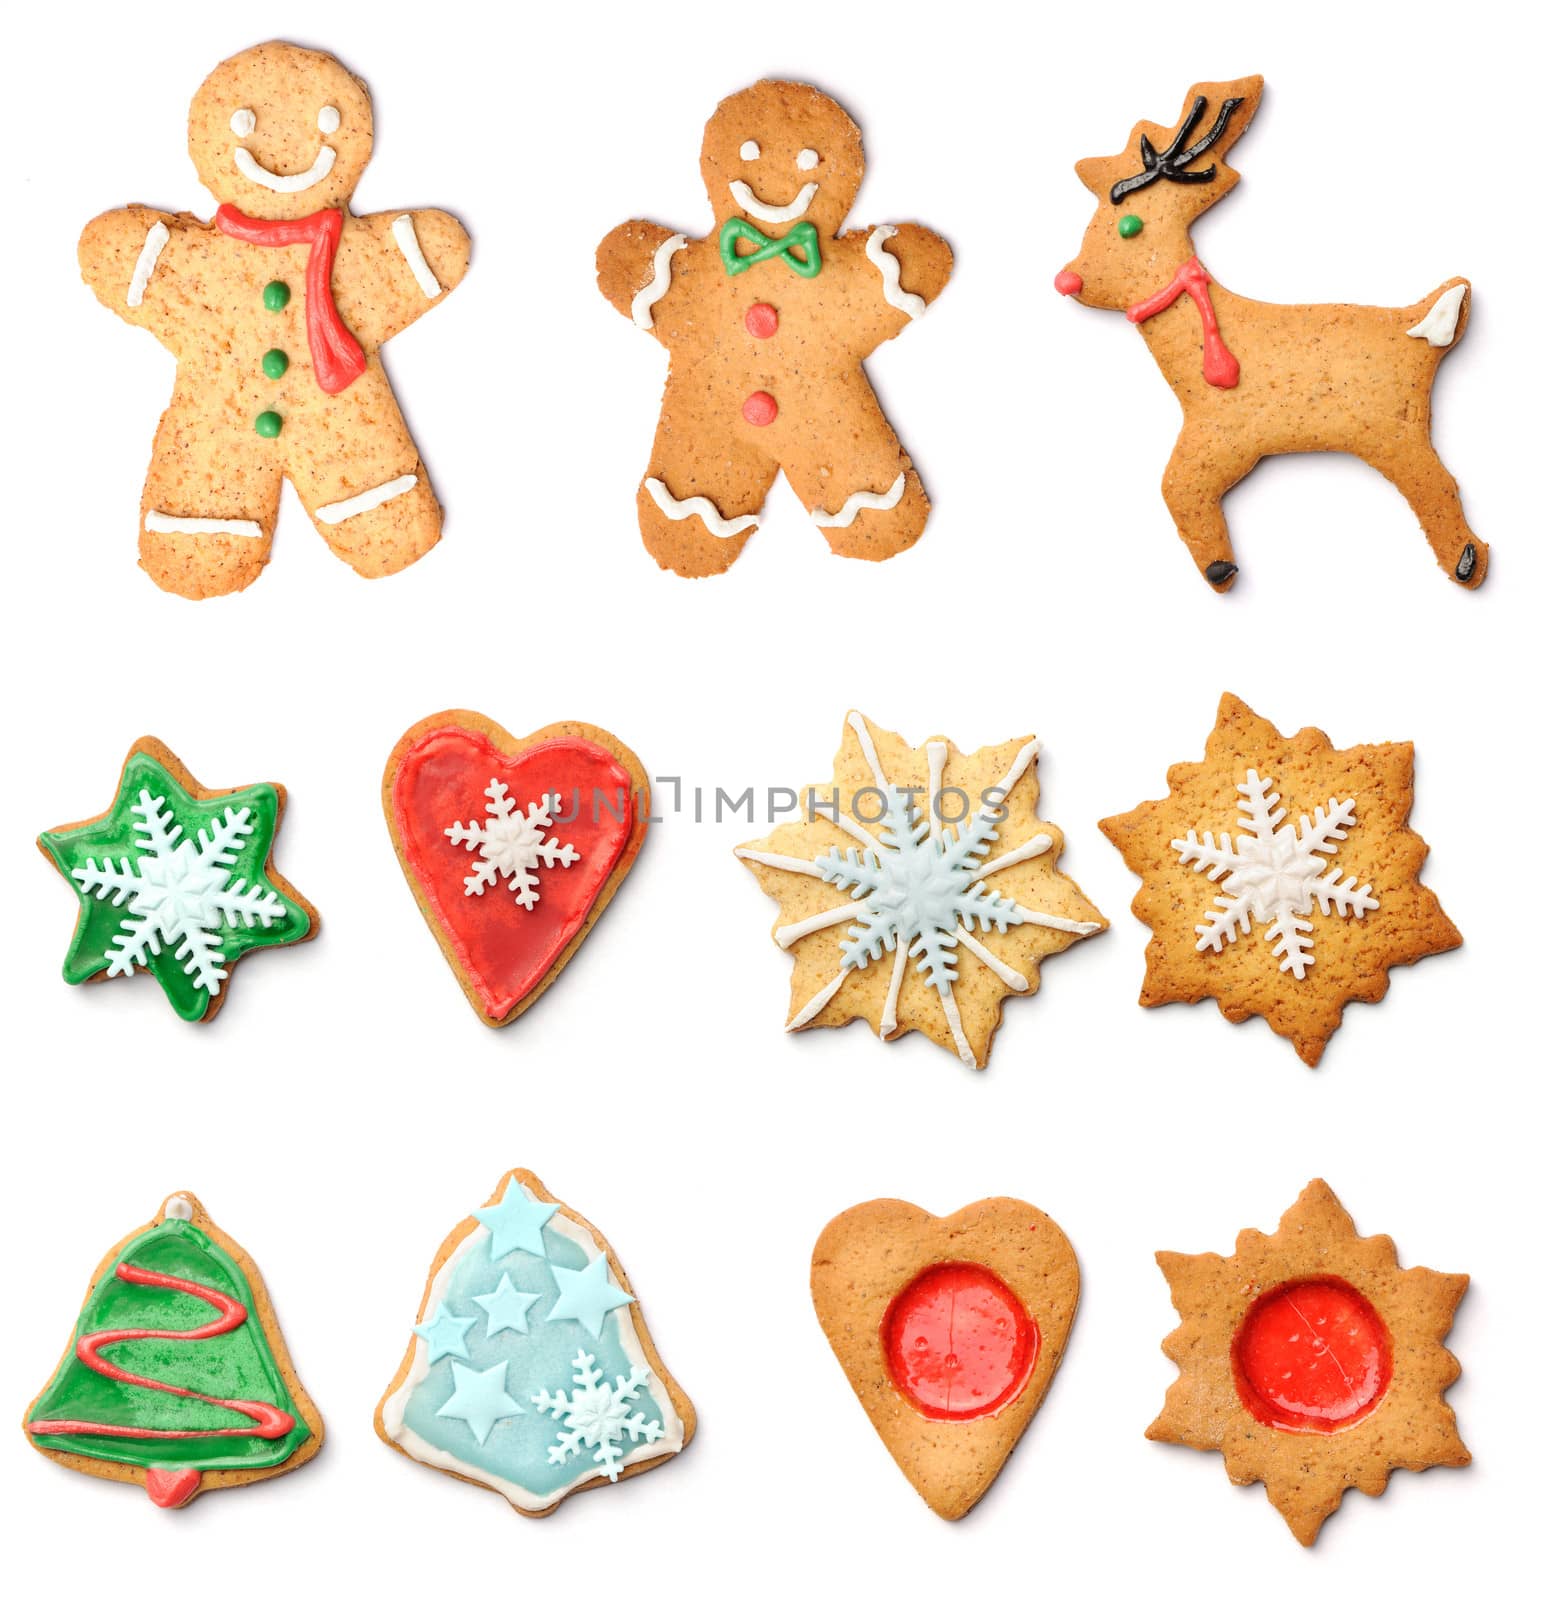 Christmas gingerbread cookies collection set by haveseen